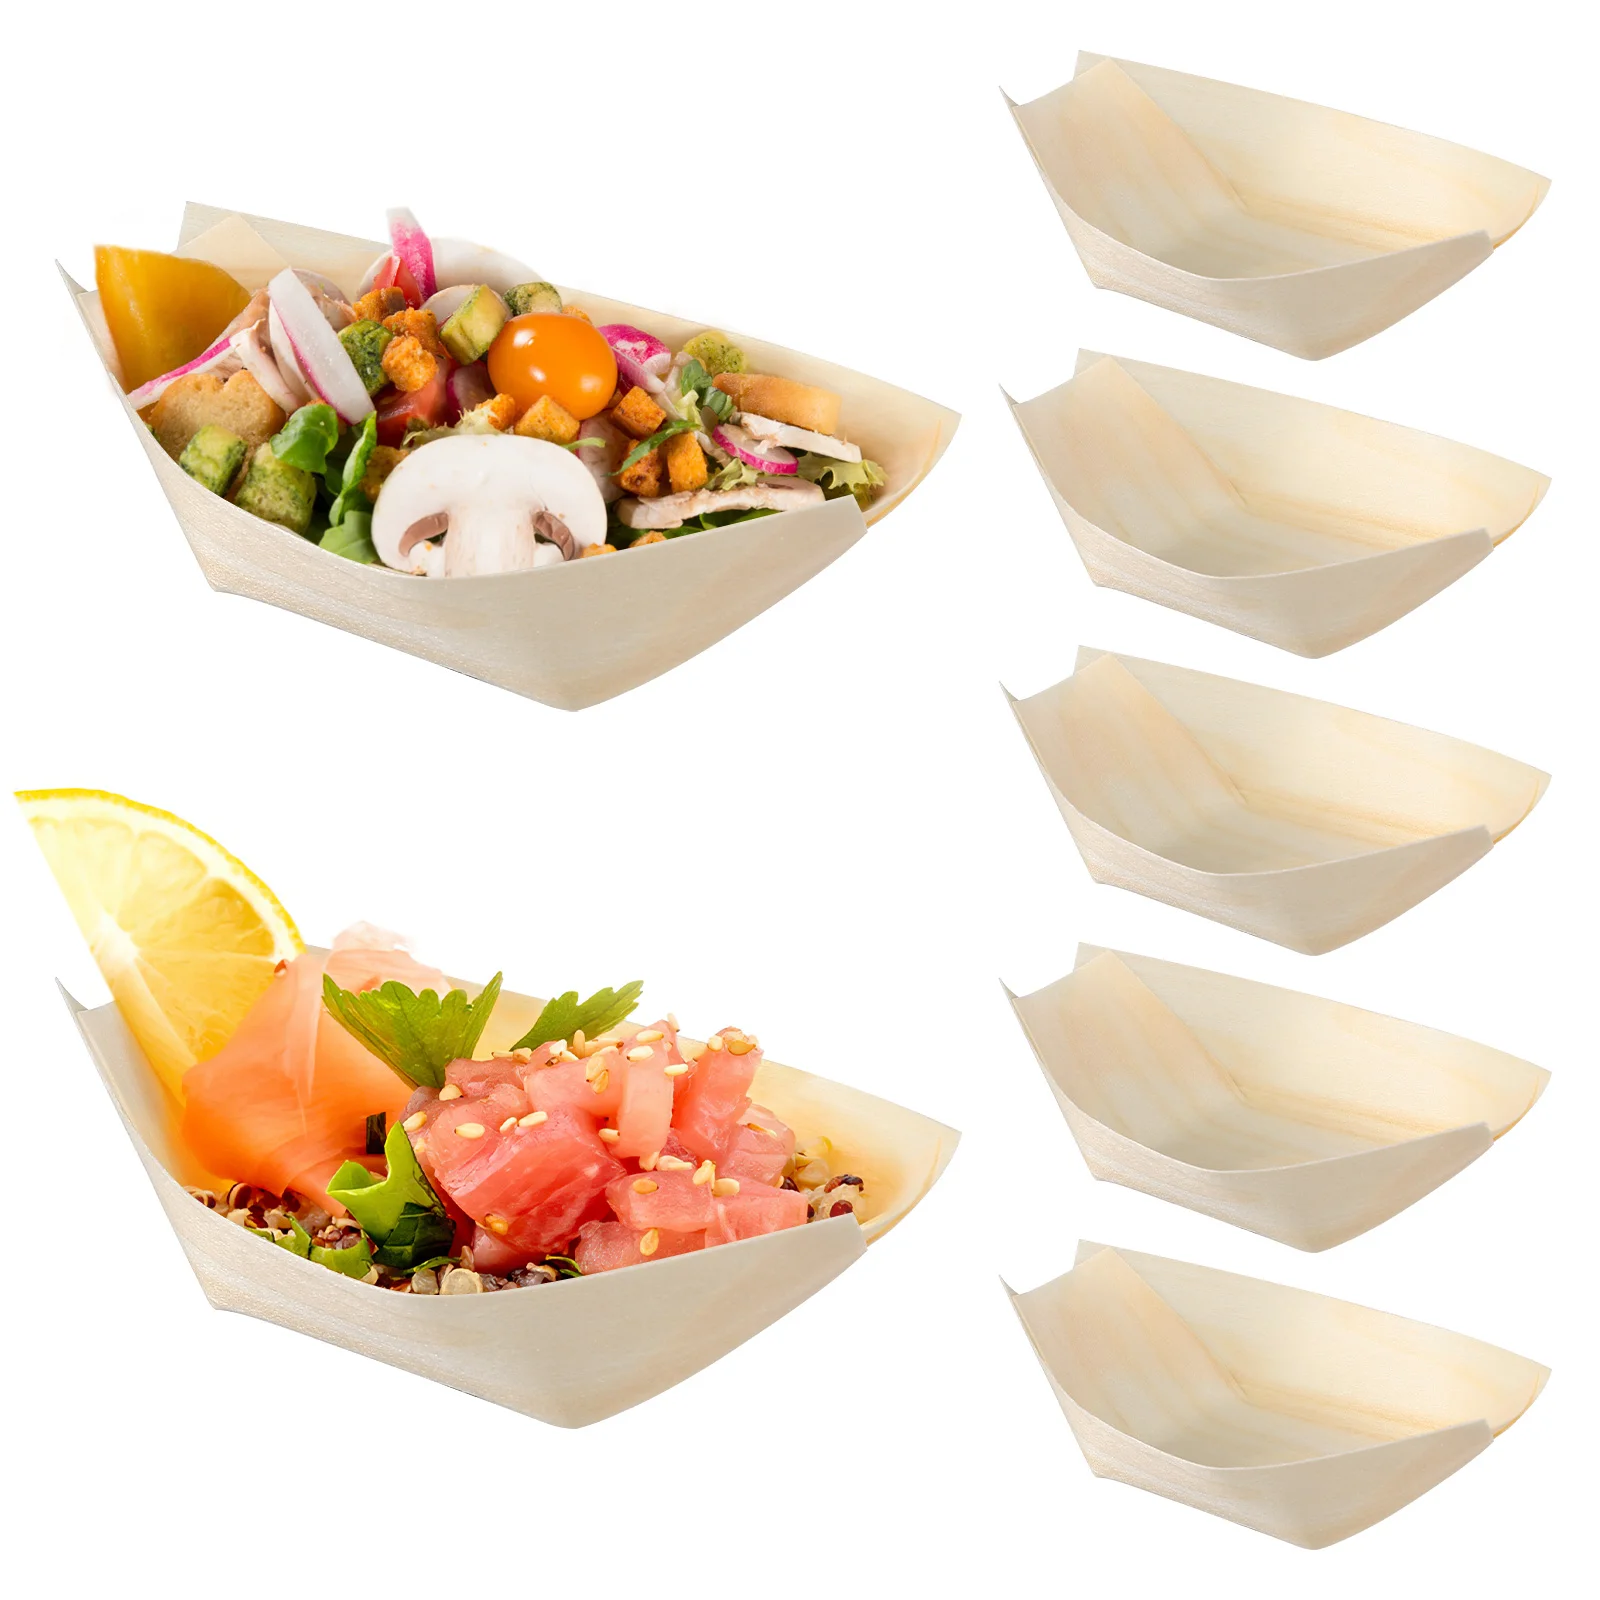 

100 Pcs Serving Plates Dessert Trays Food Boats Deli Cheese Snack Tray Cutlery Set Food Service Trays Disposable Food Trays